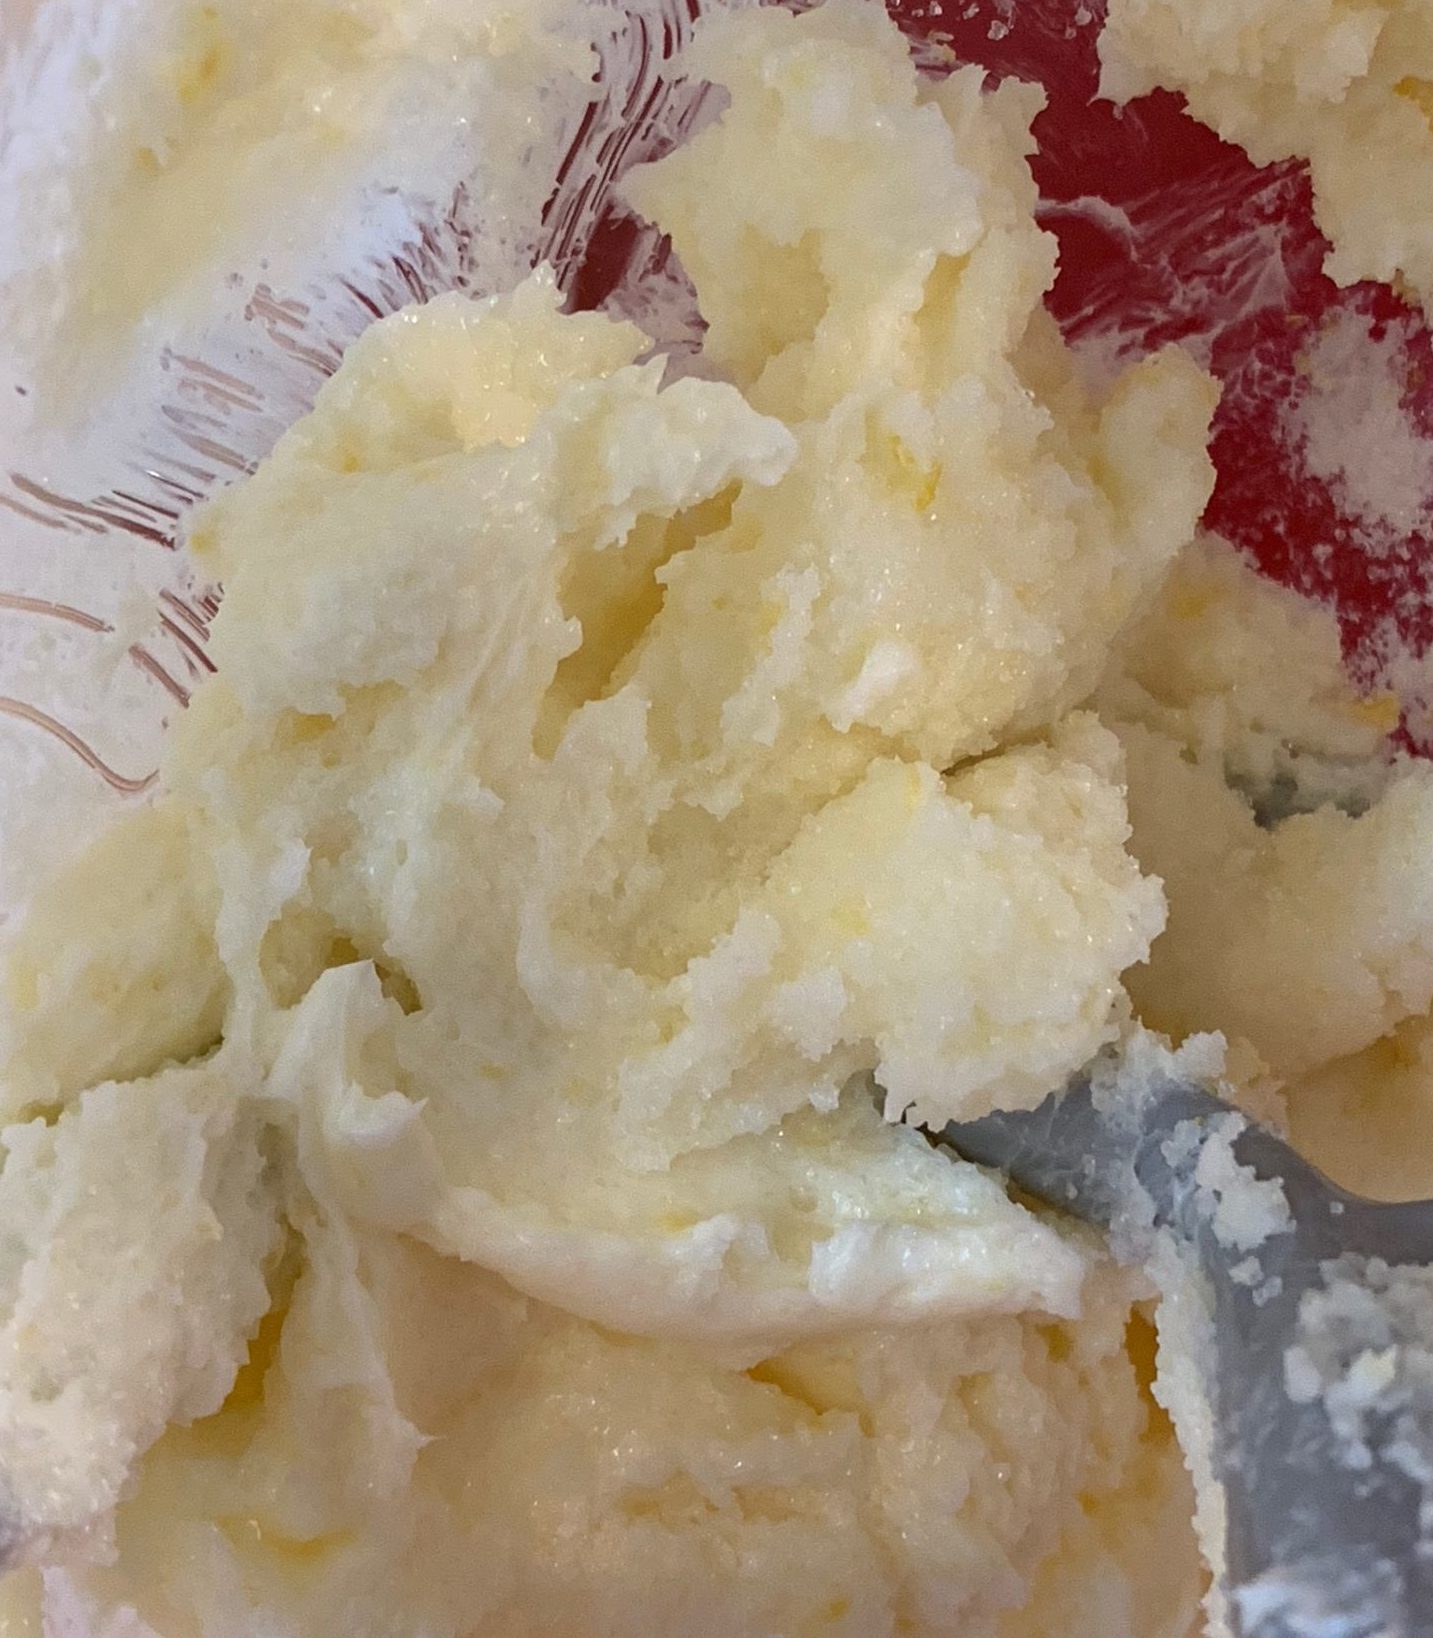 Butter and sugar creamed together to "light and fluffy"